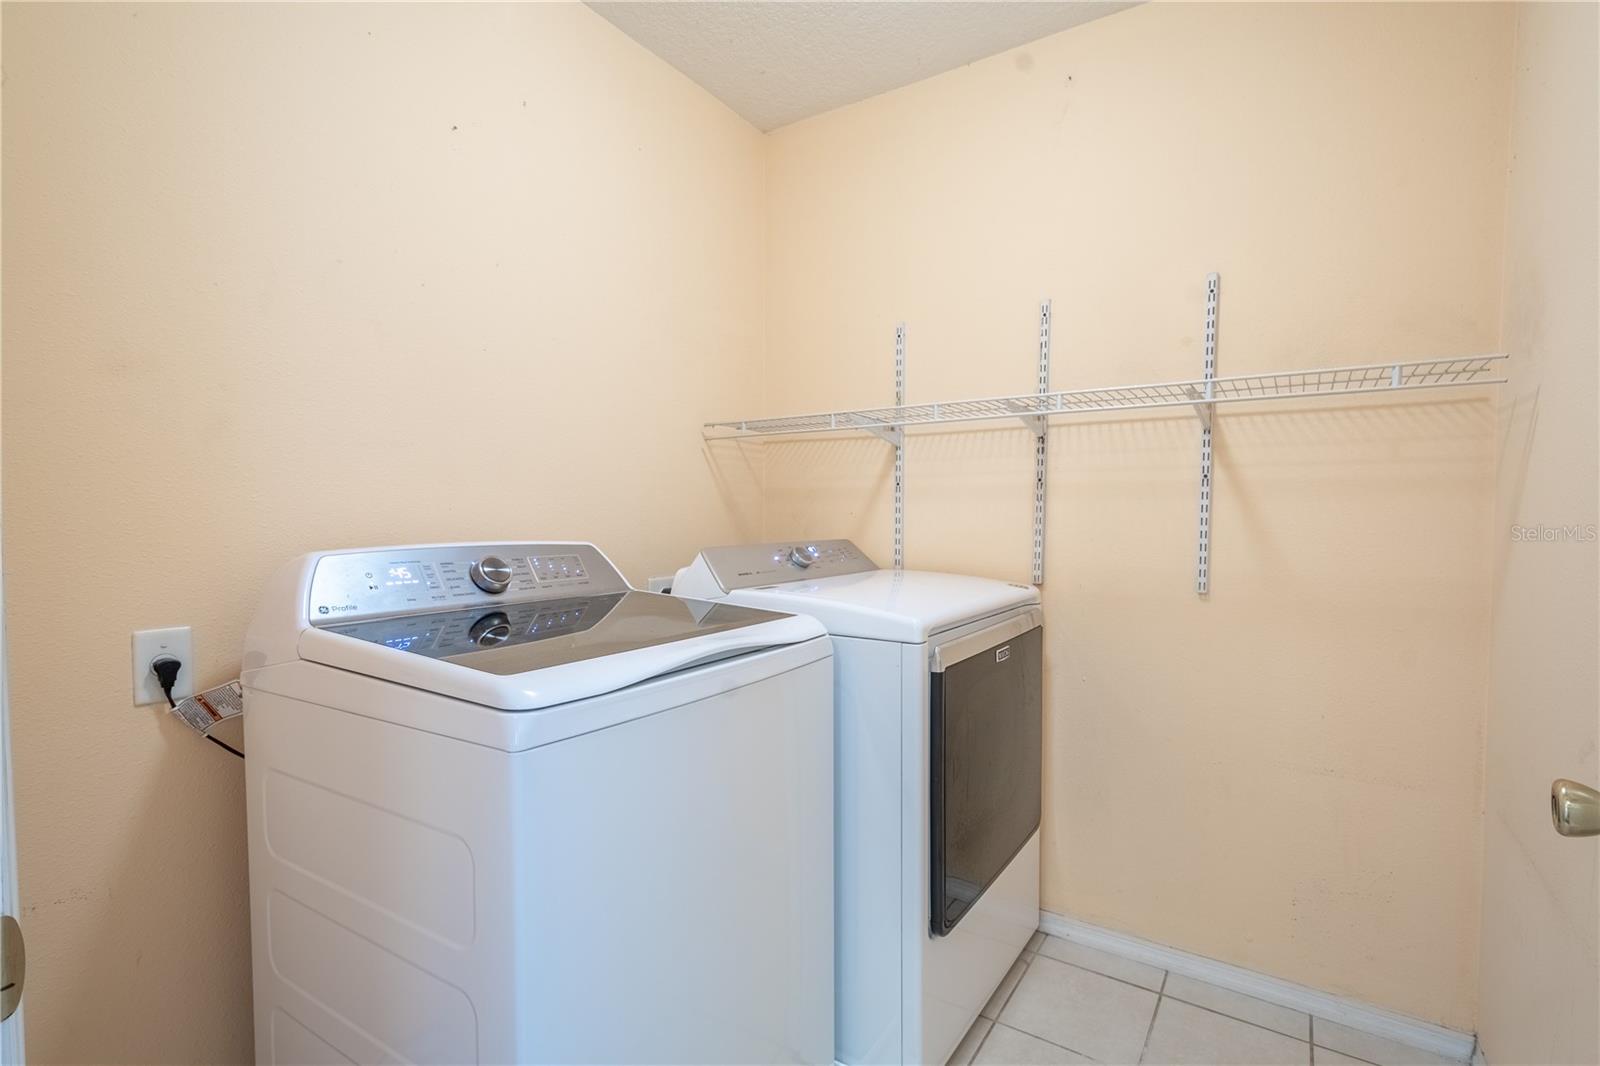 The laundry room (4' x 6') features a washer and ceramic tile floor.